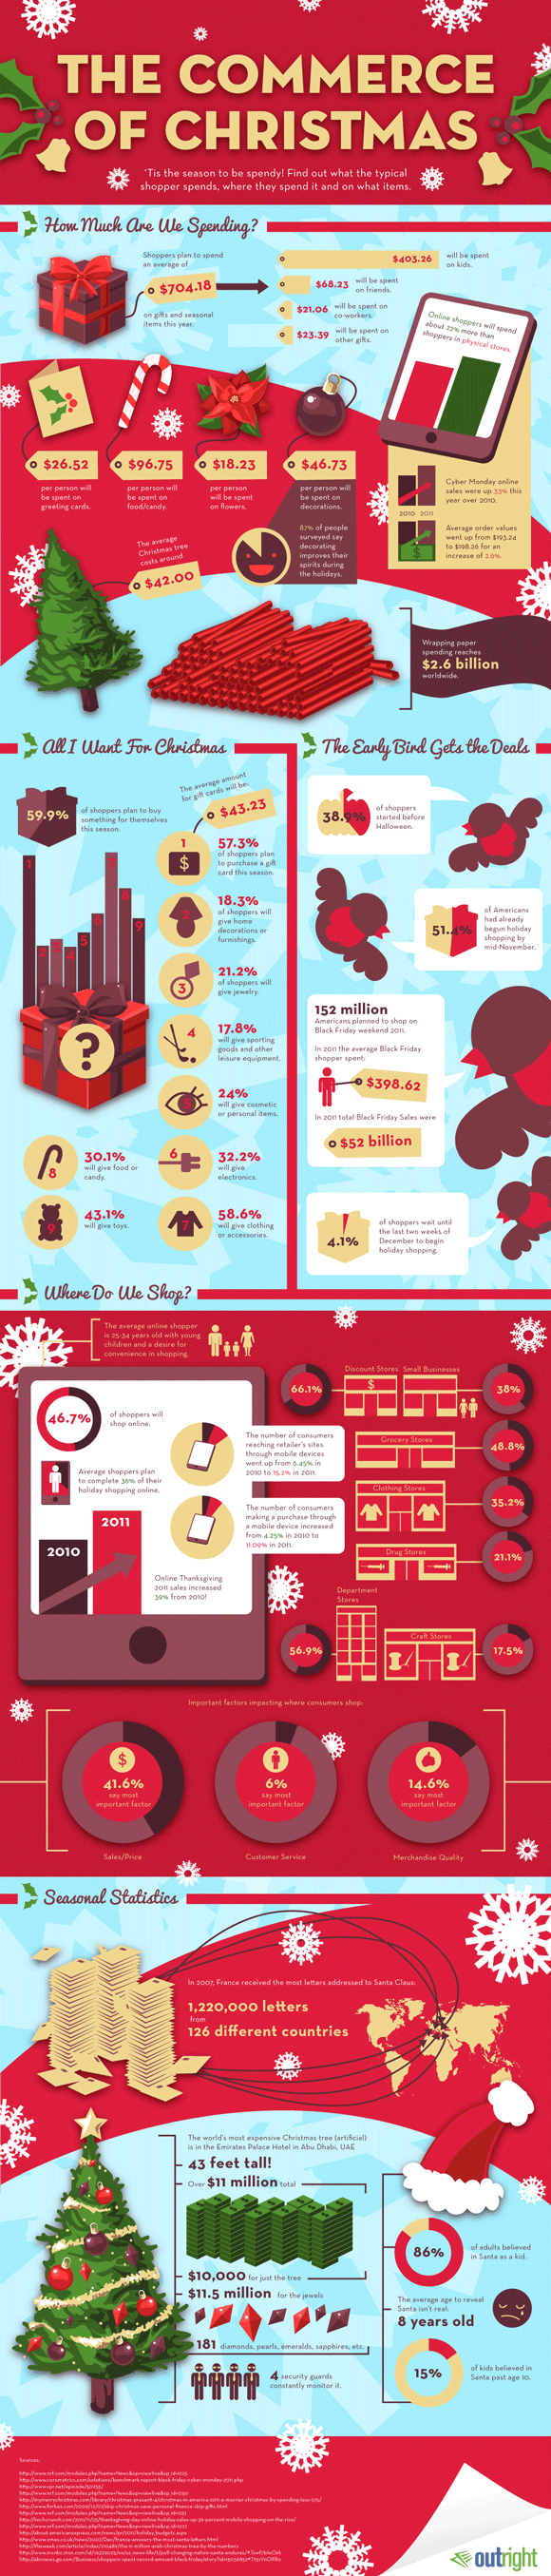 Commerce-of-Christmas-Infographic